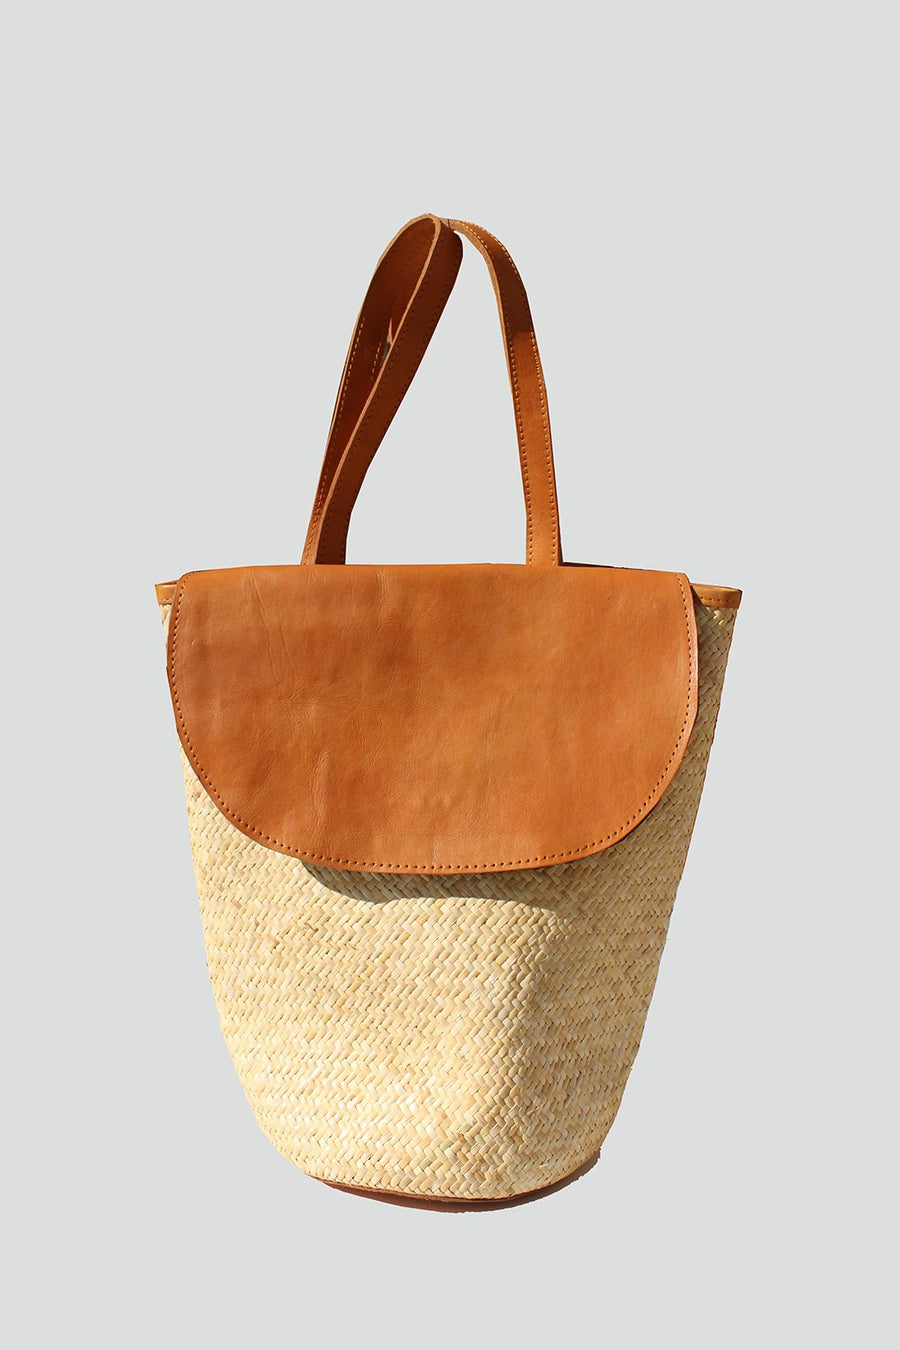 Featuring a snap closure wicker detailed backpack in the color tan